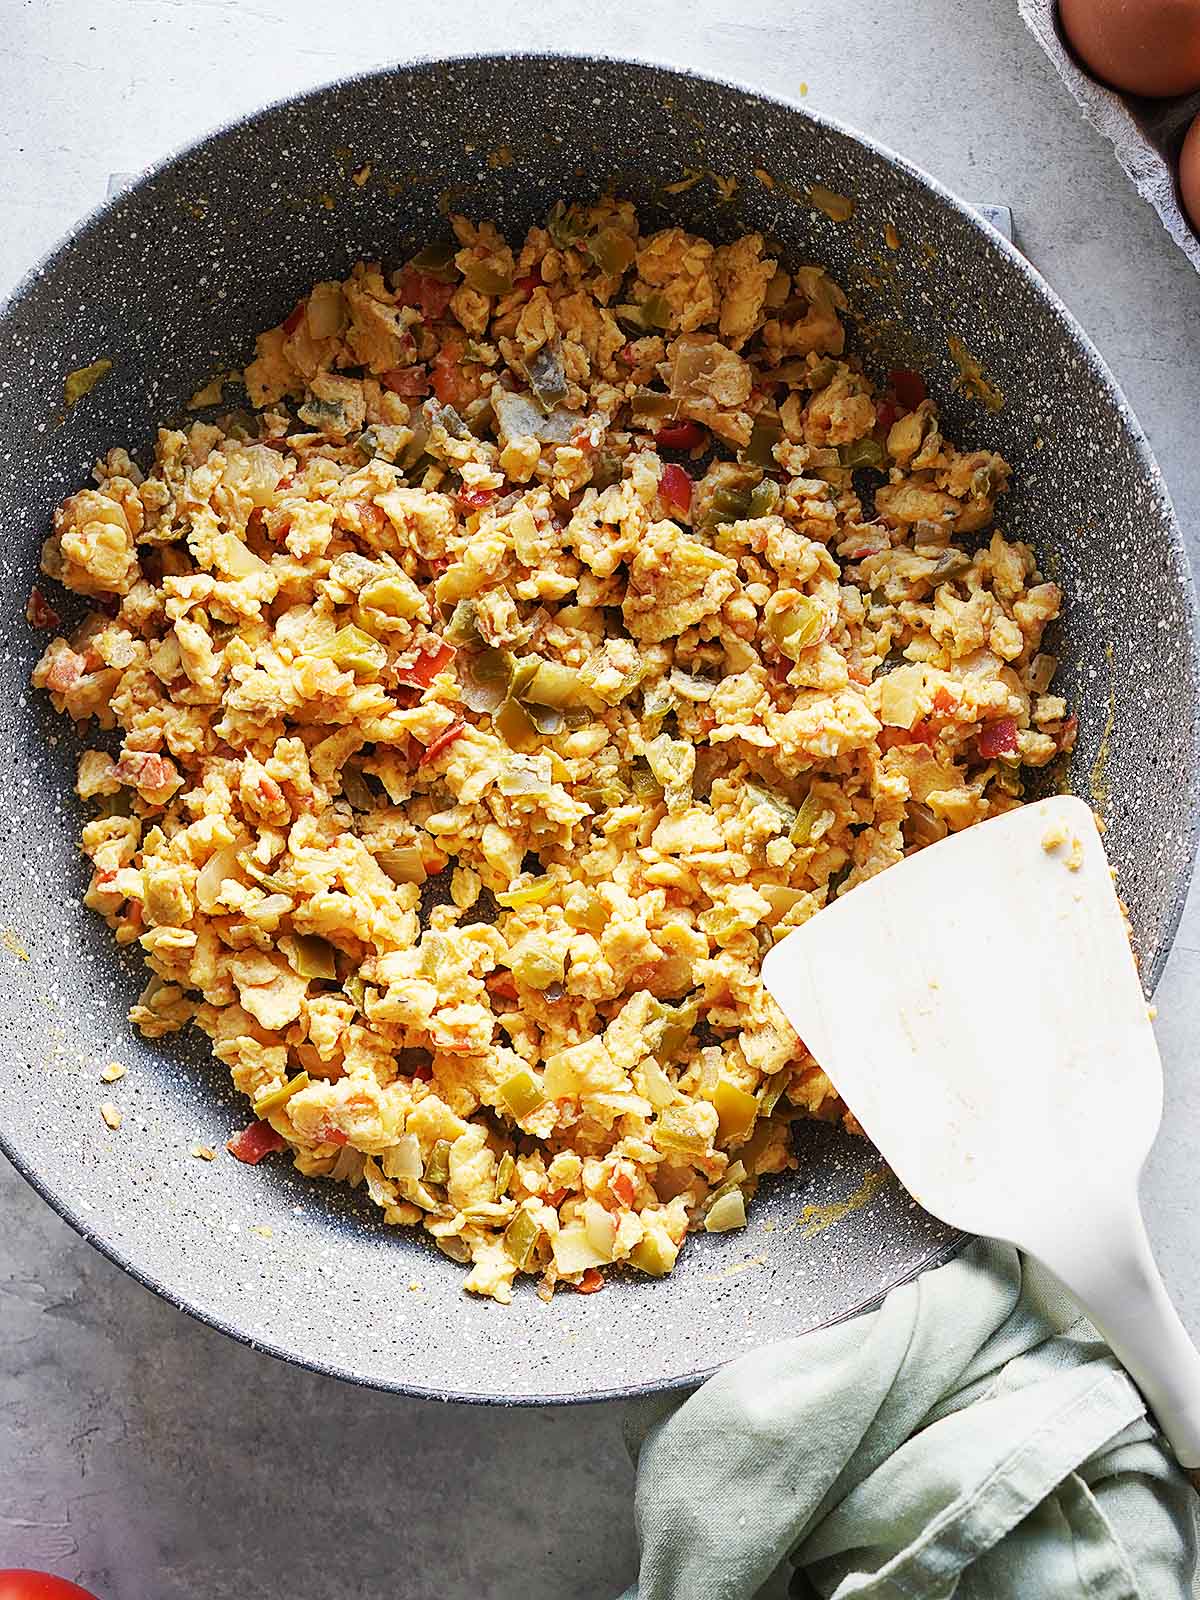 Scrambled eggs in a gray skillet.